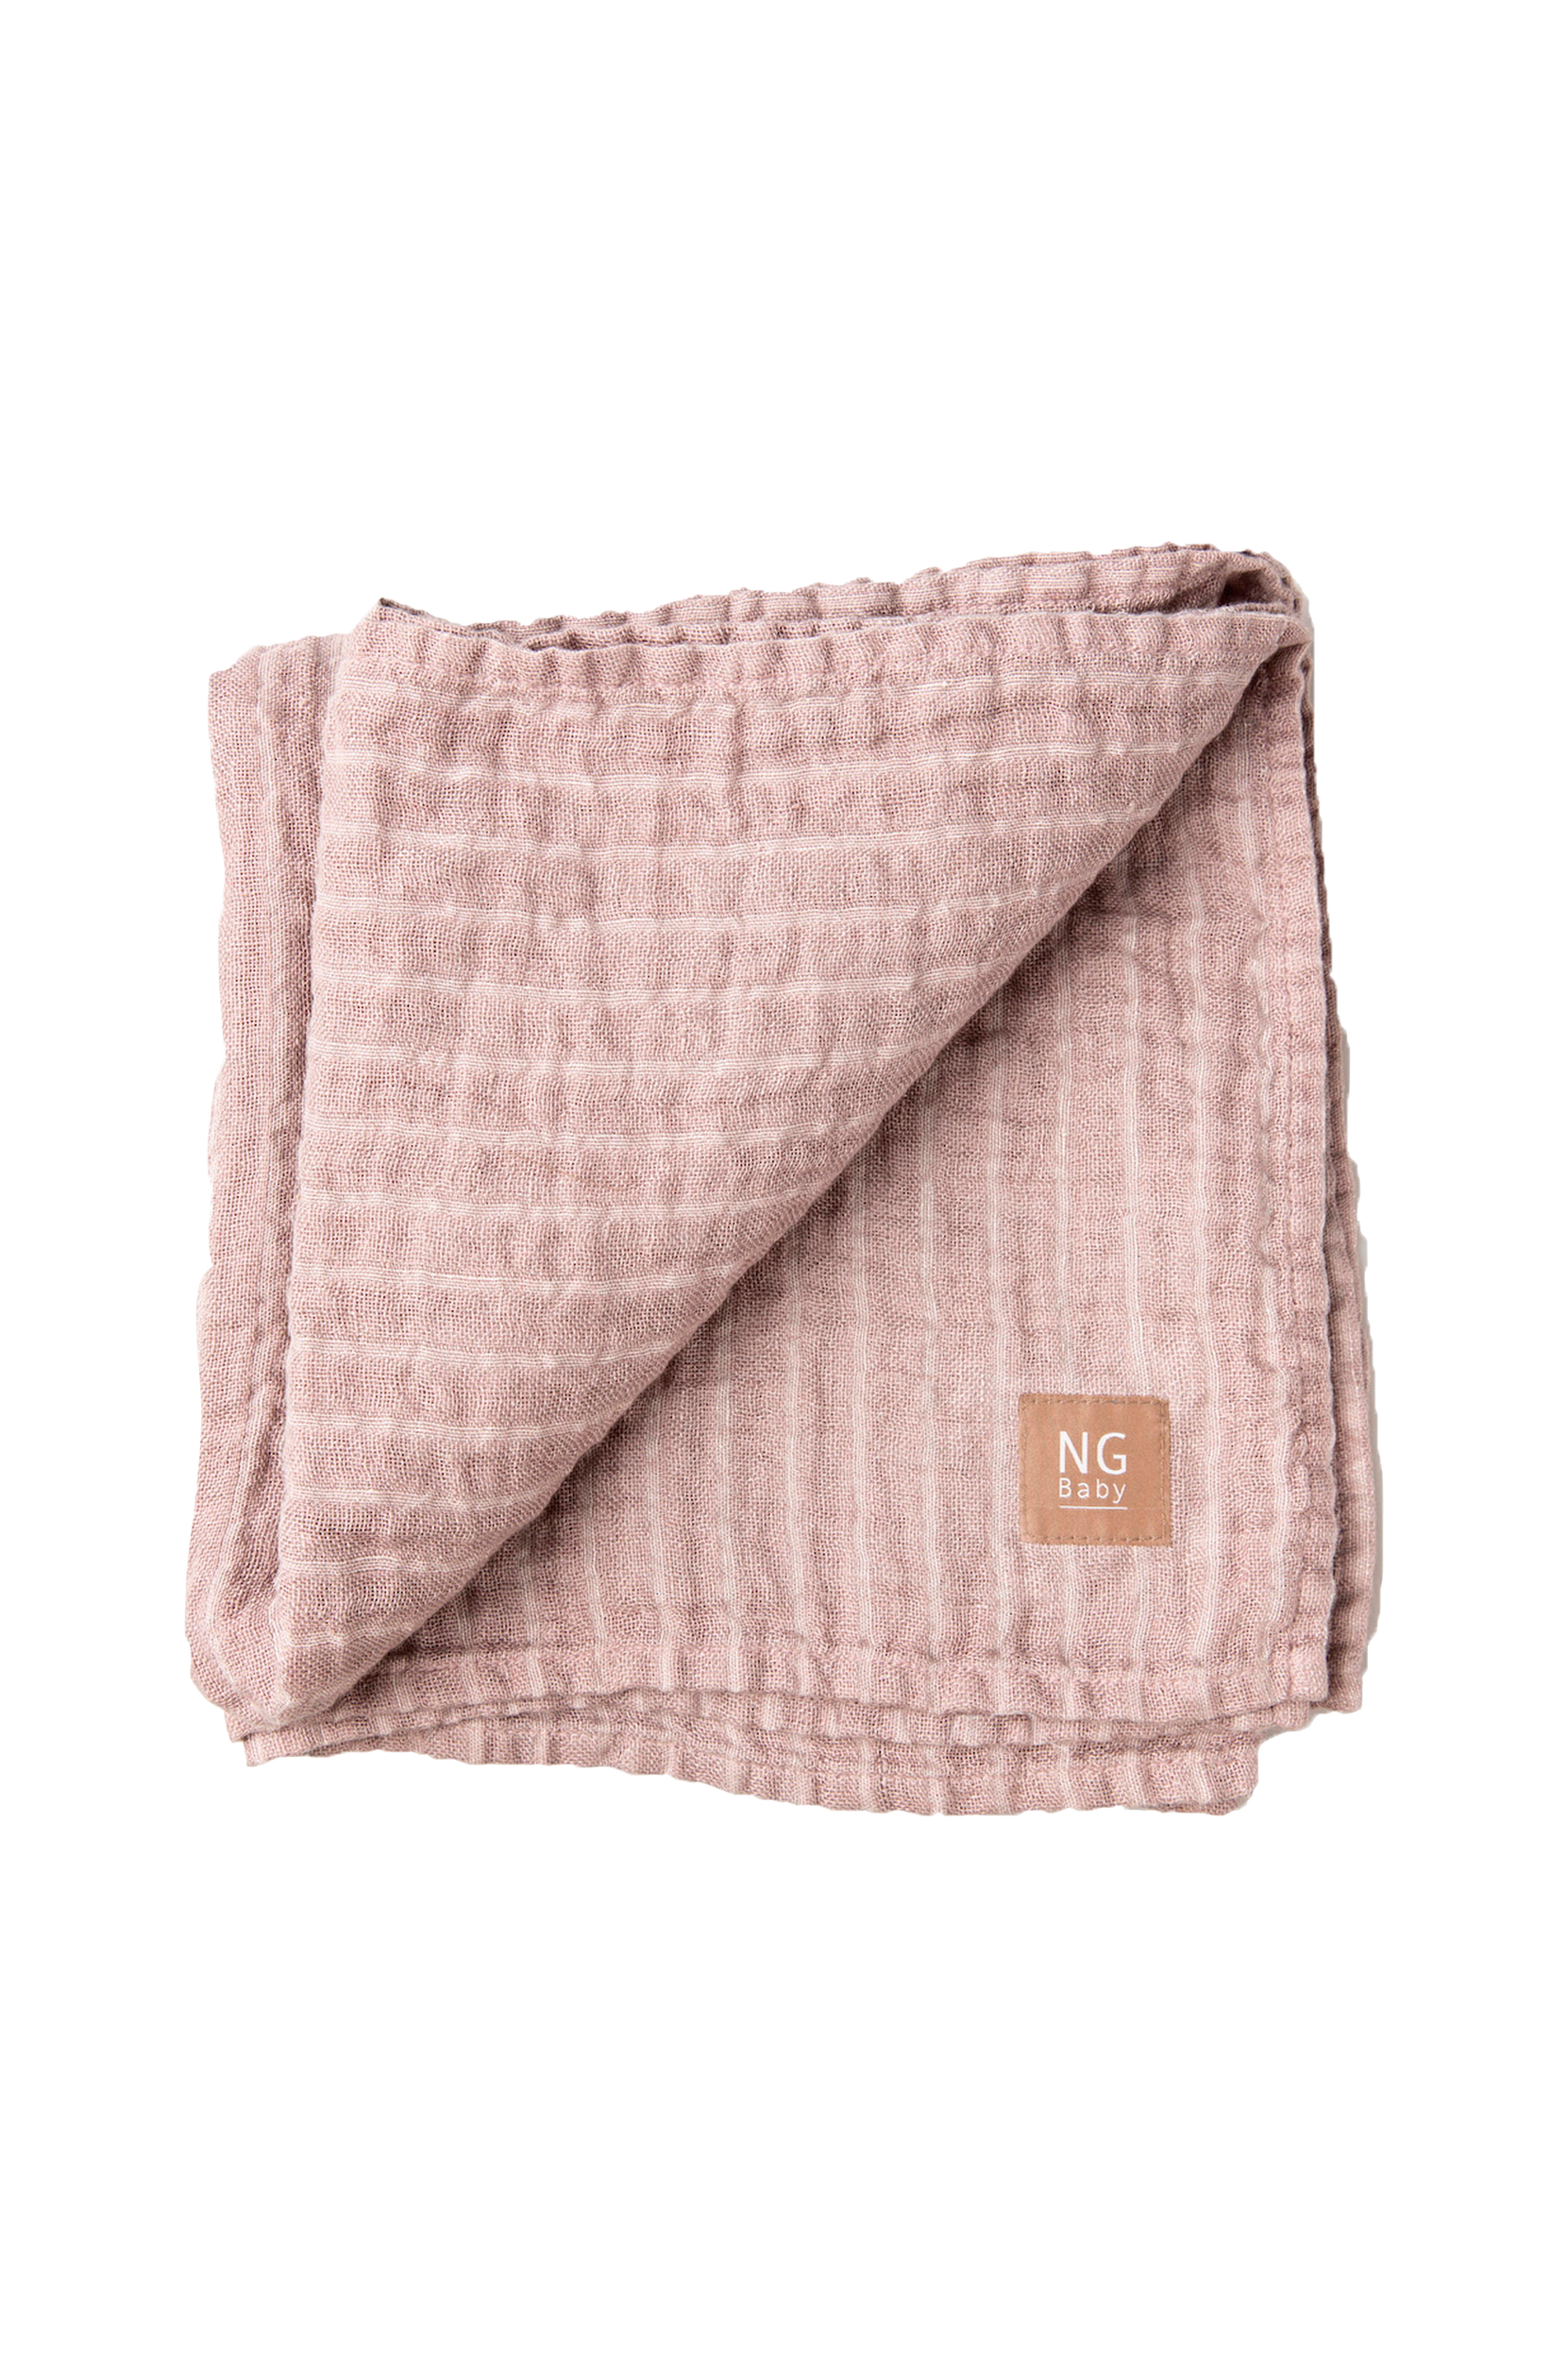 NG Baby - LinneFilt Dusty Pink + Ivory stripe